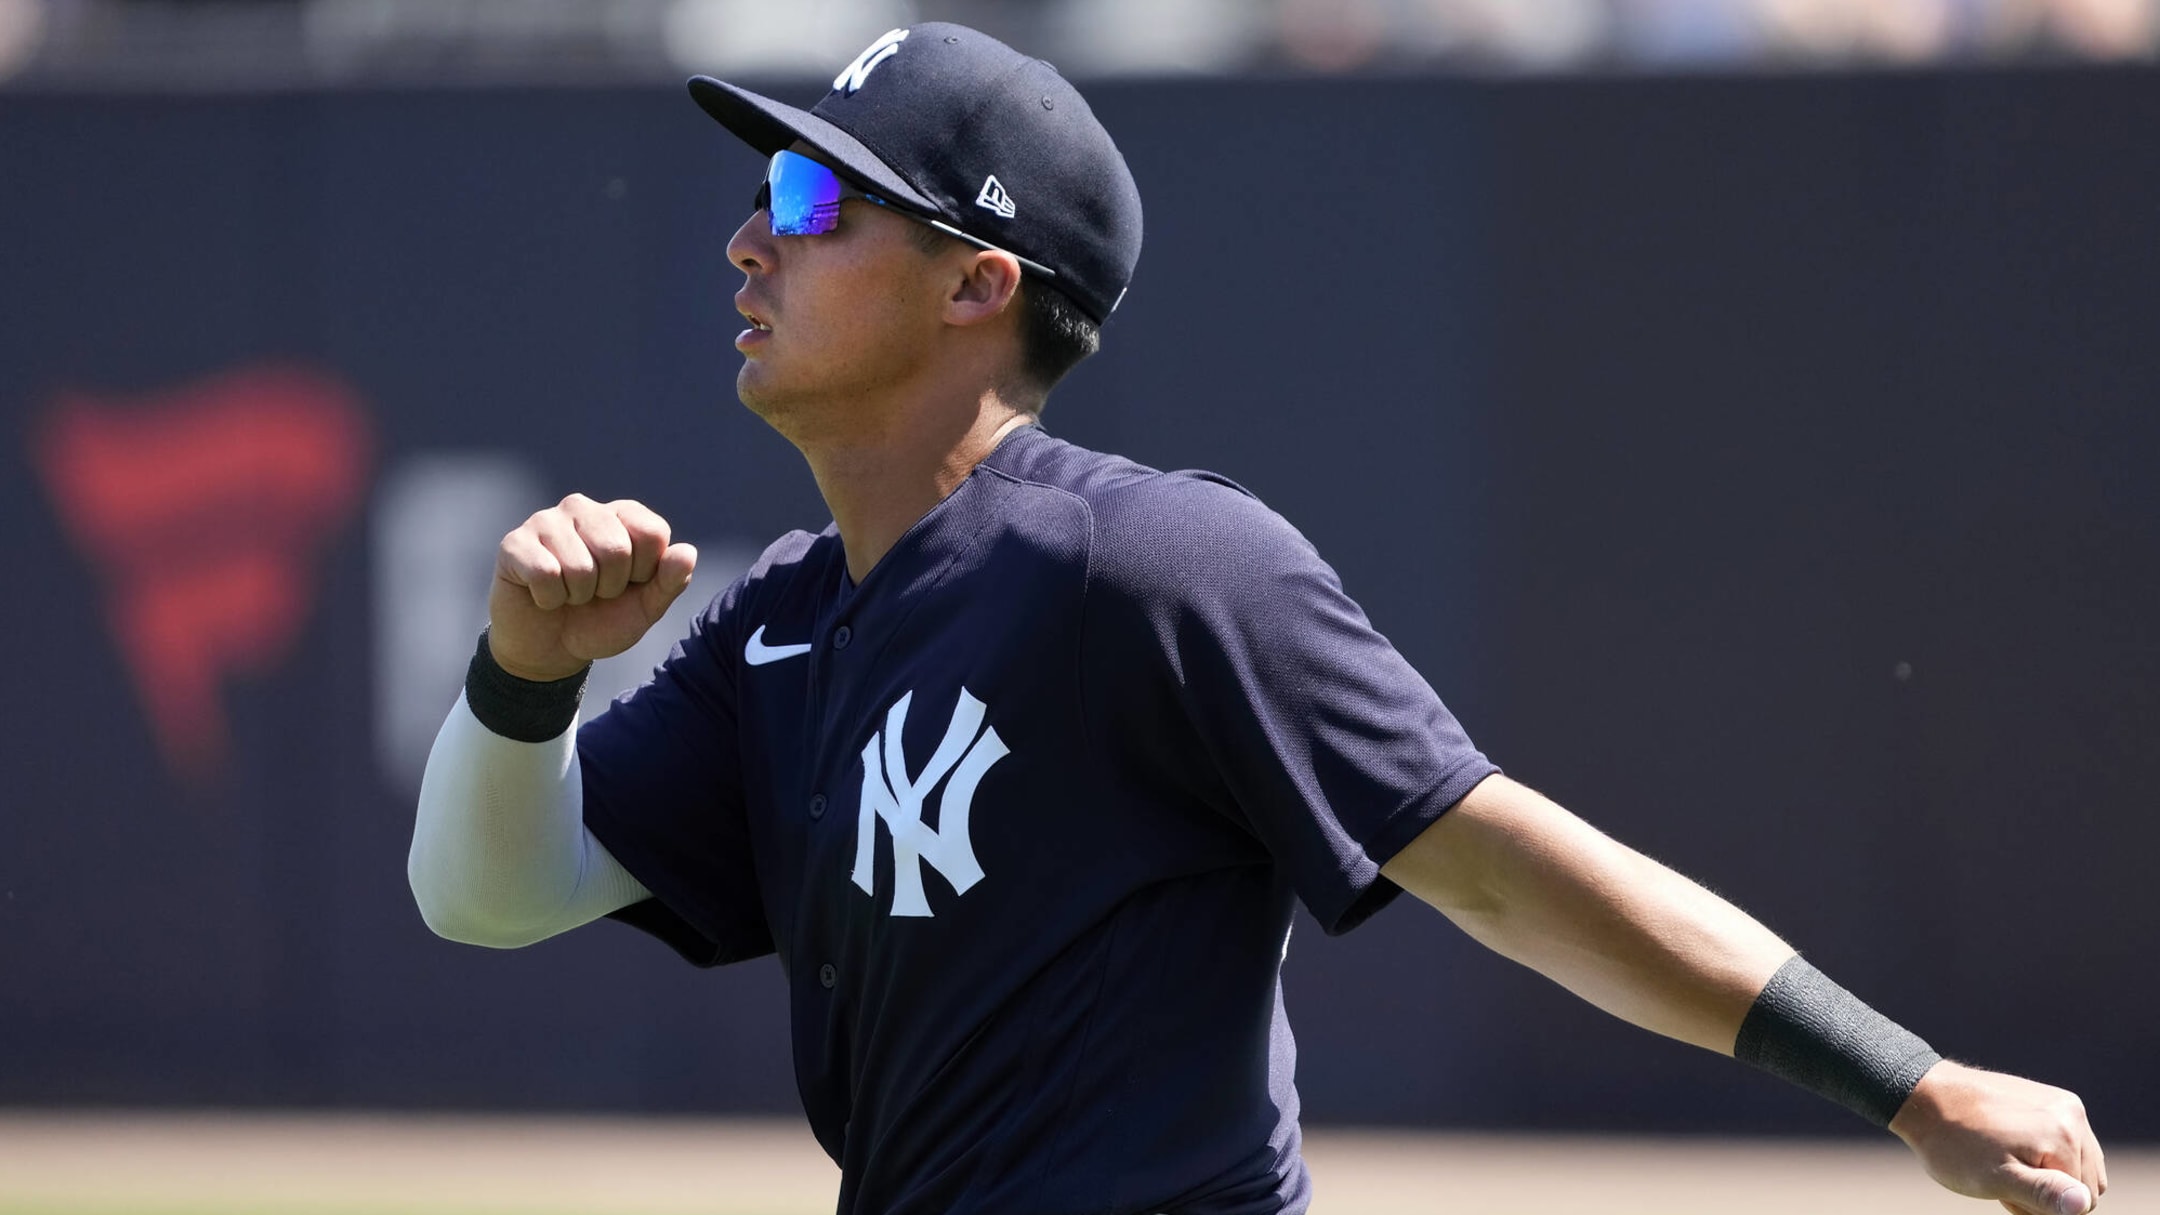 Derek Jeter congratulates Yankees' Anthony Volpe on call-up ahead